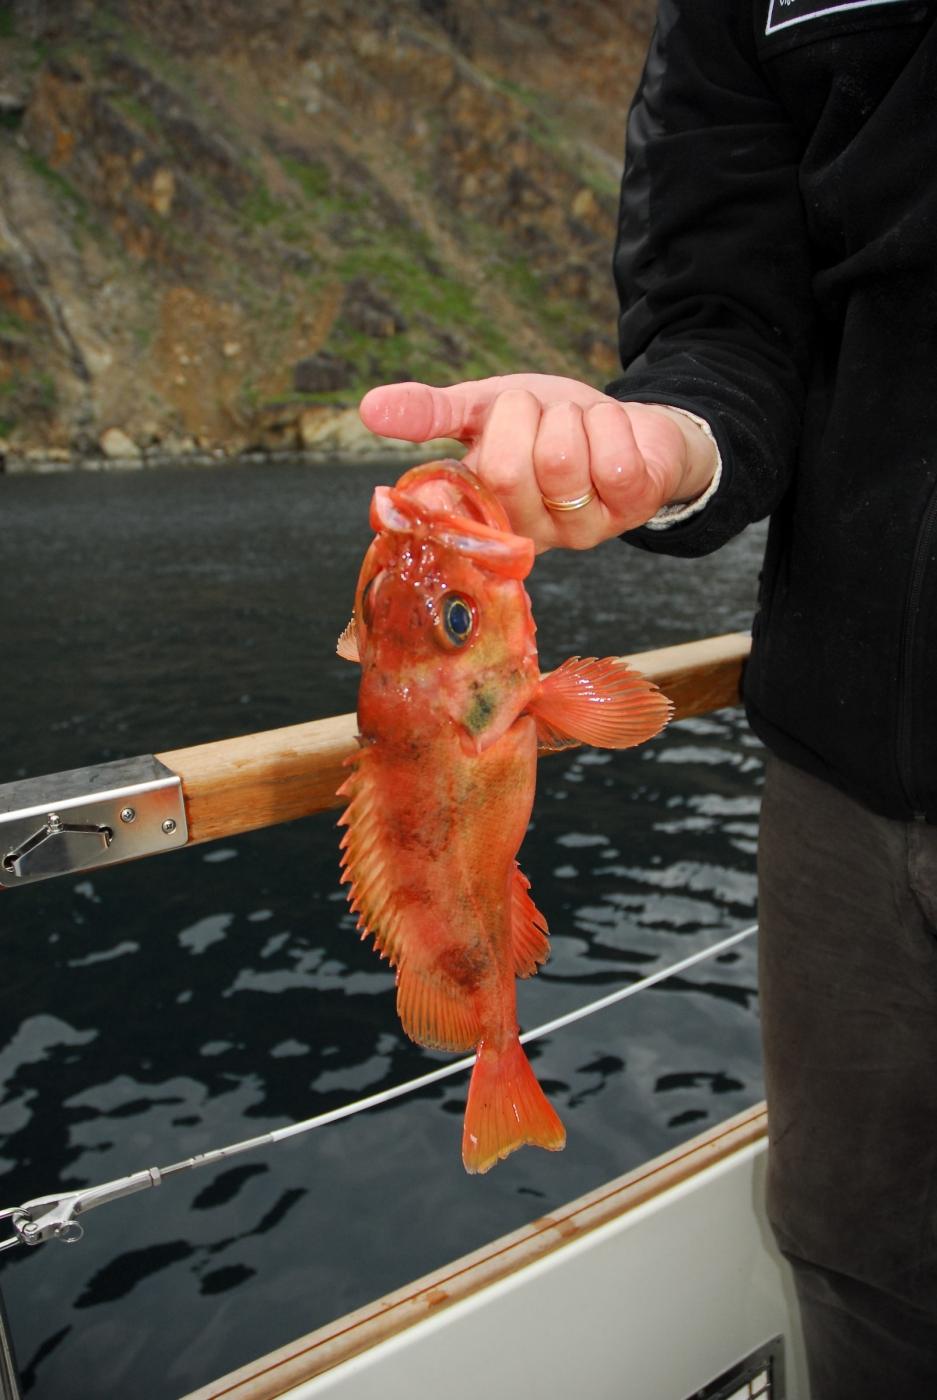 Catching Red fish near Sisimiut. Photo by Signe Vest - Visit Greenland